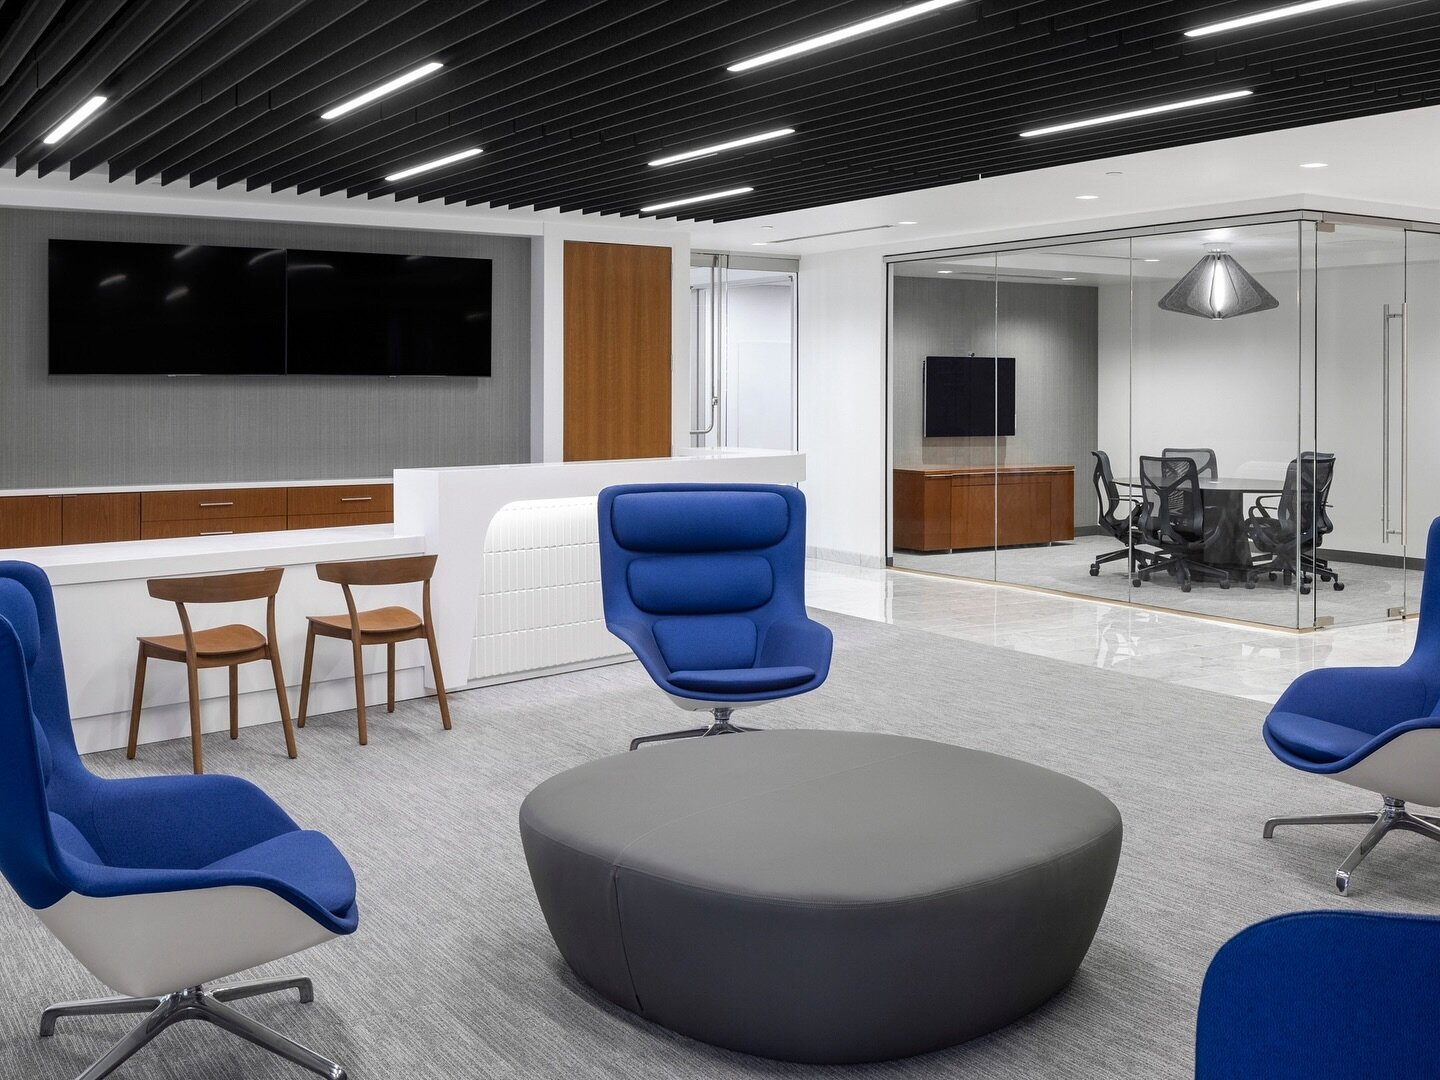 Clean and modern multifunctional space designed by @hoknetwork